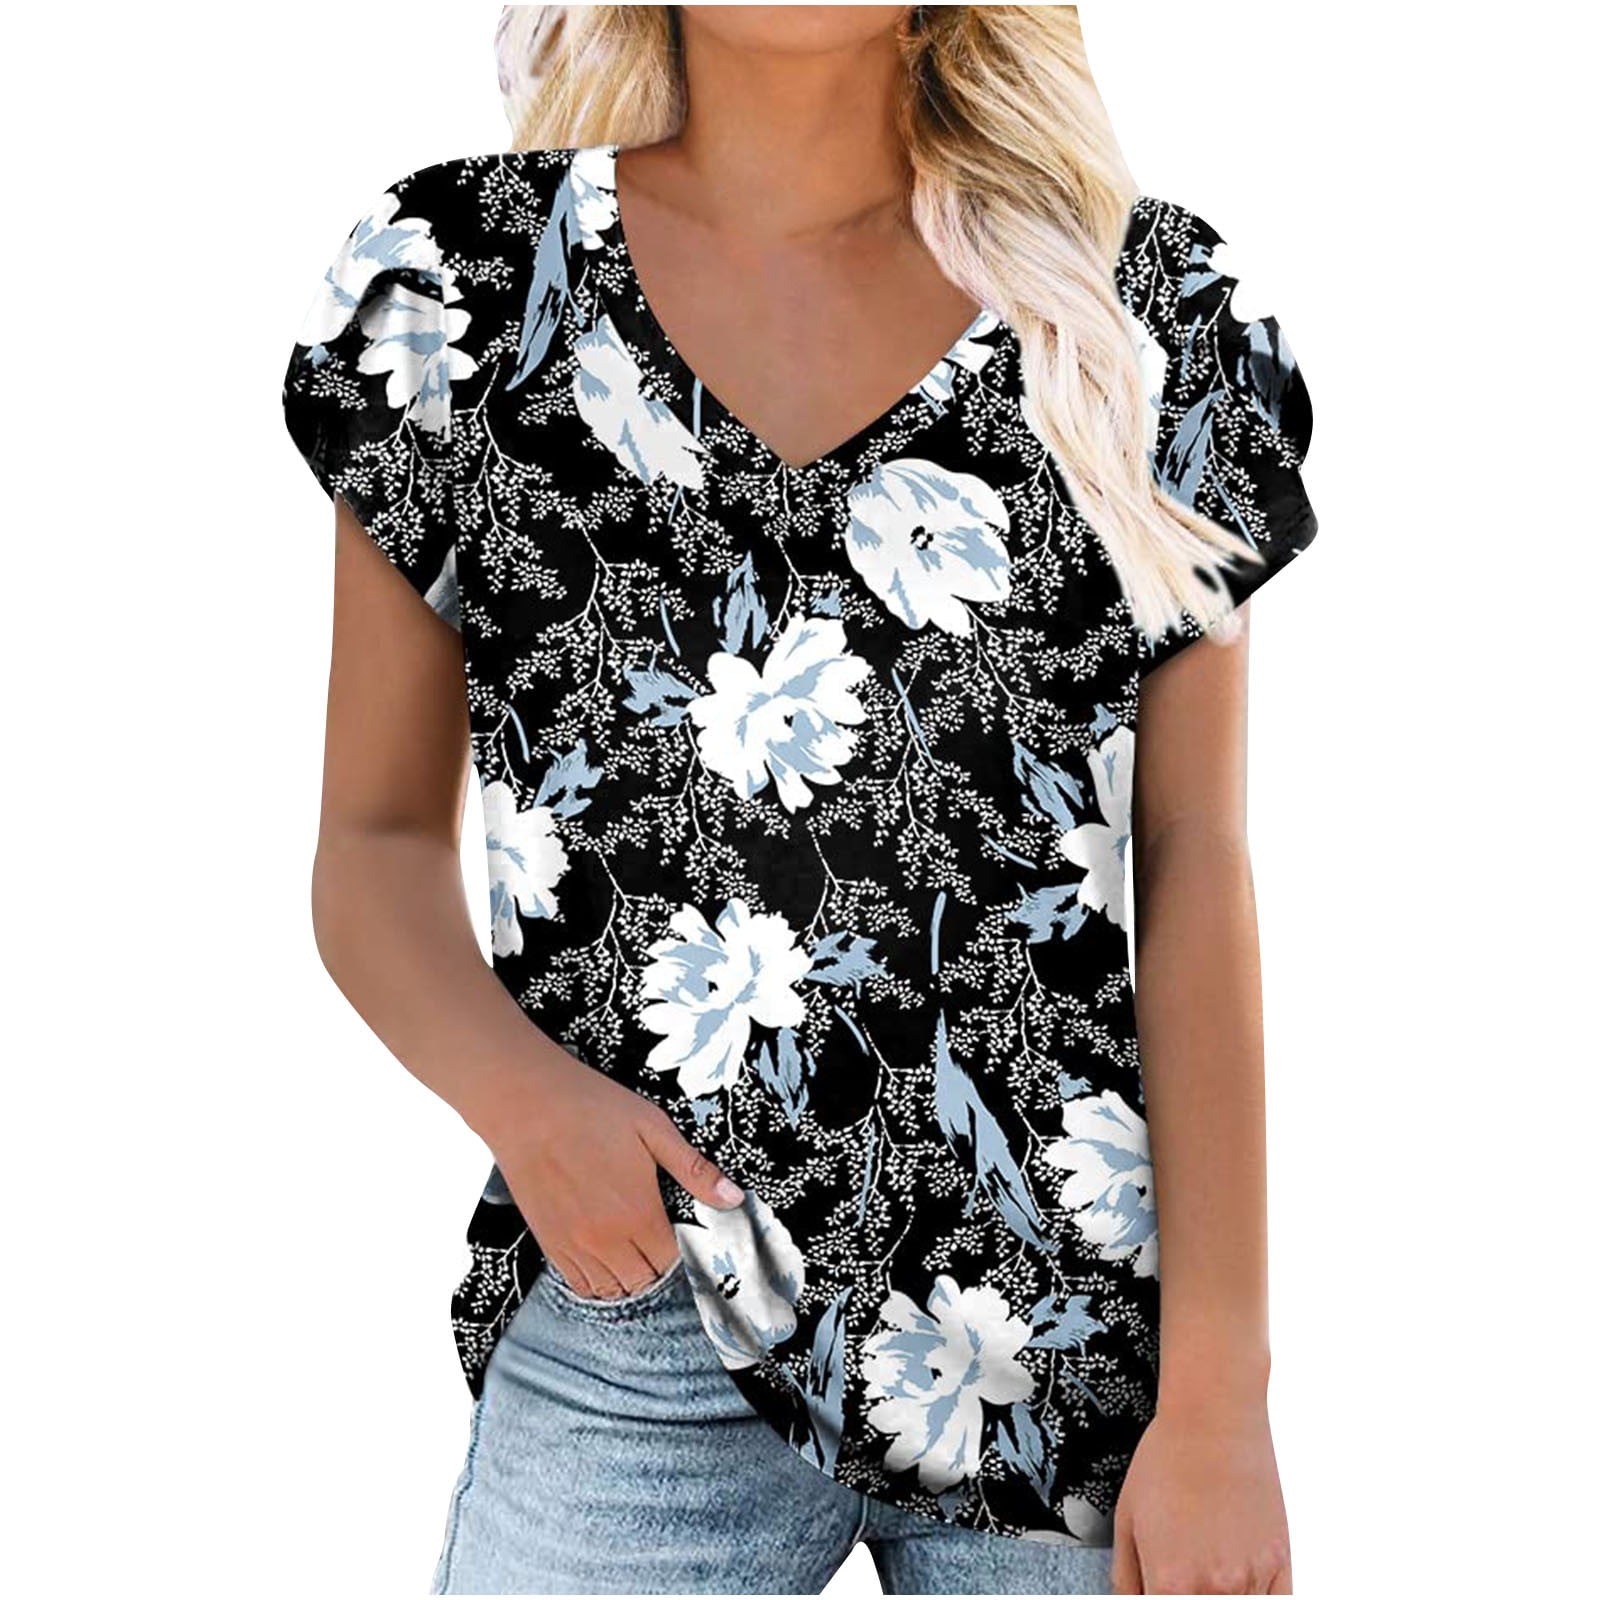 Blouses for Women Fashion Oversized Shirts Women,Women Floral Print Blouse Short Sleeve Shirts Round Collar Y3k Top Blusas Mujer Casuales Y Elegantes - Walmart.com